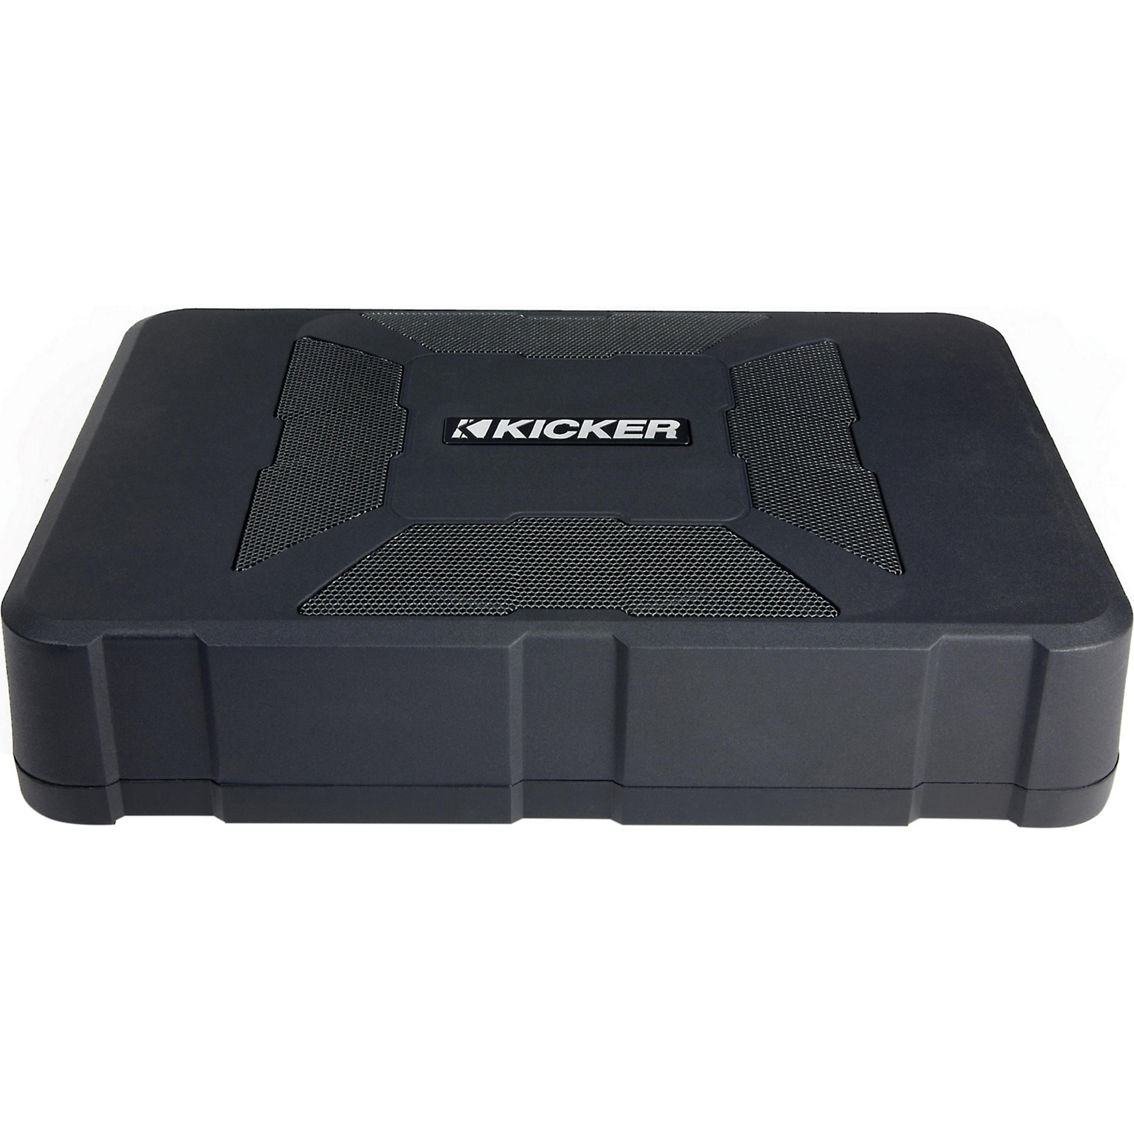 Kicker Hideaway Compact Powered Subwoofer - Image 2 of 4